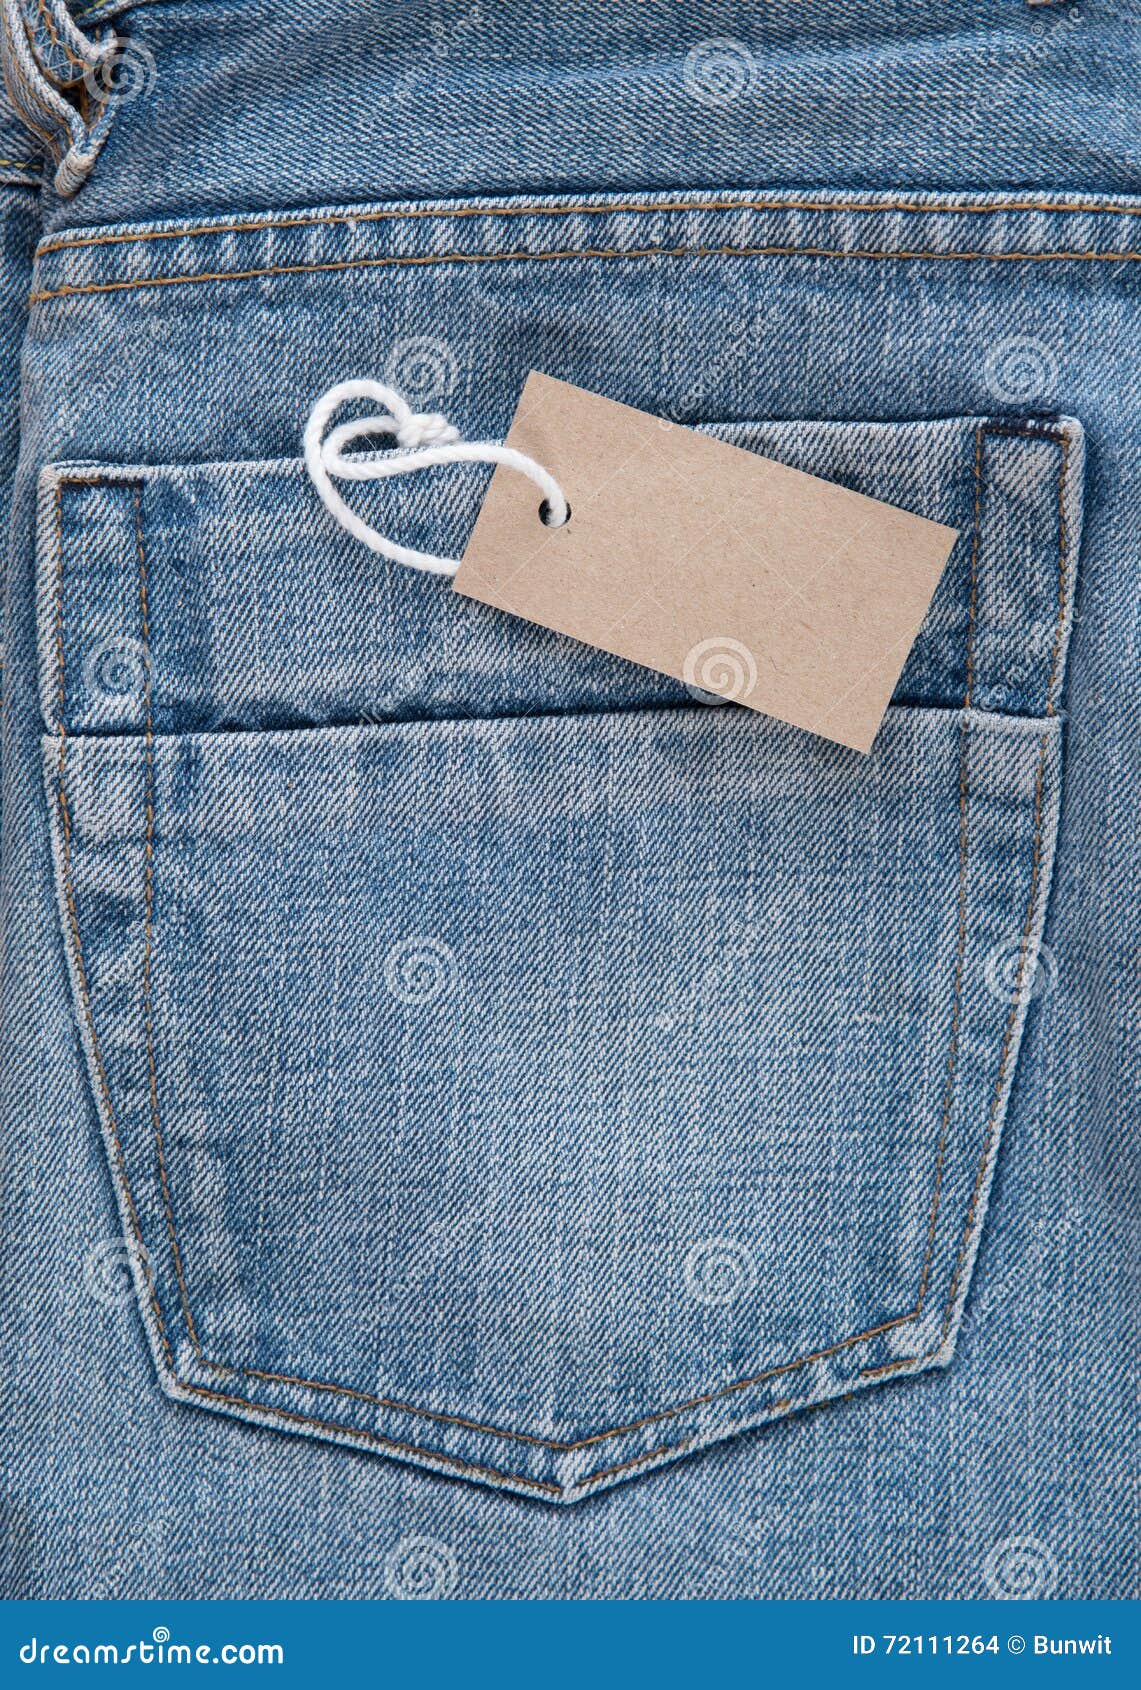 Blue jean with price tag stock photo. Image of style - 72111264